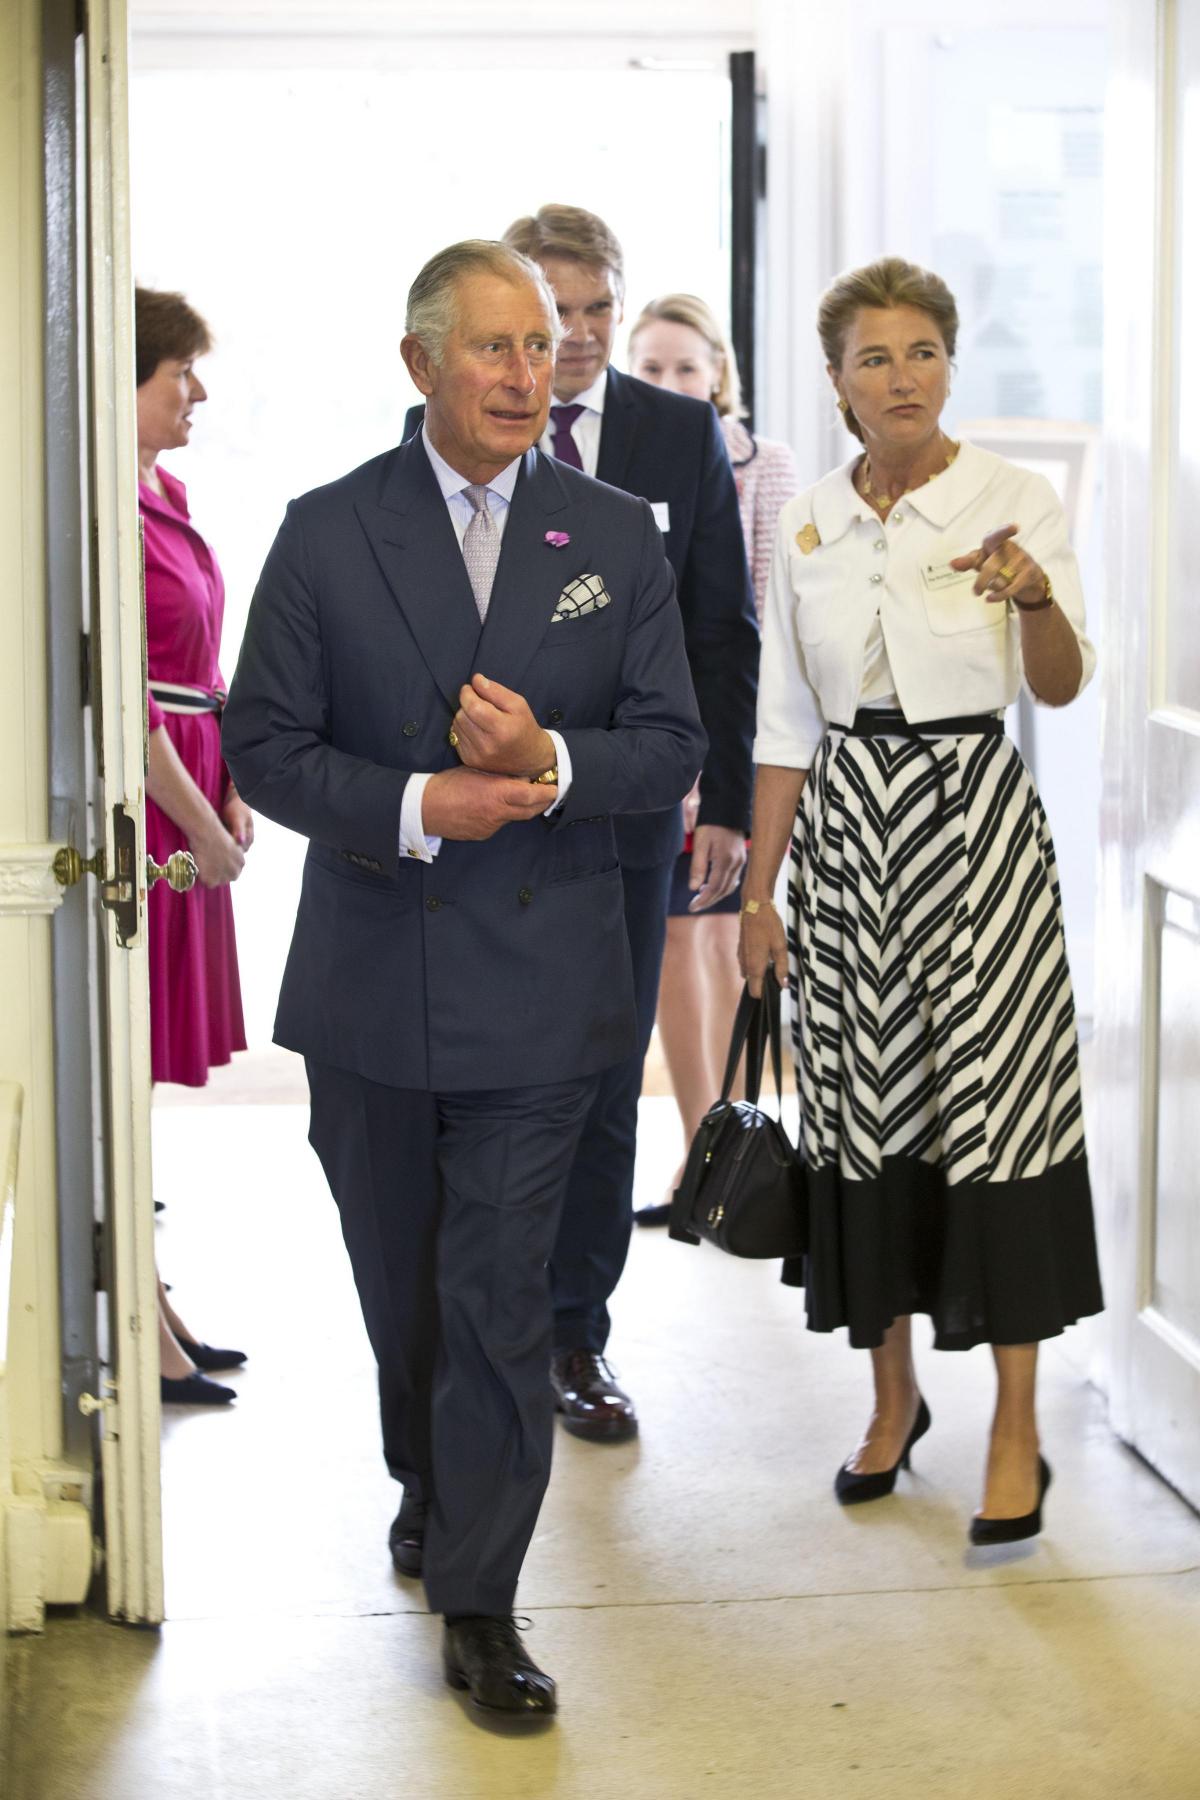 Prince Charles and the Duchess of Wellington